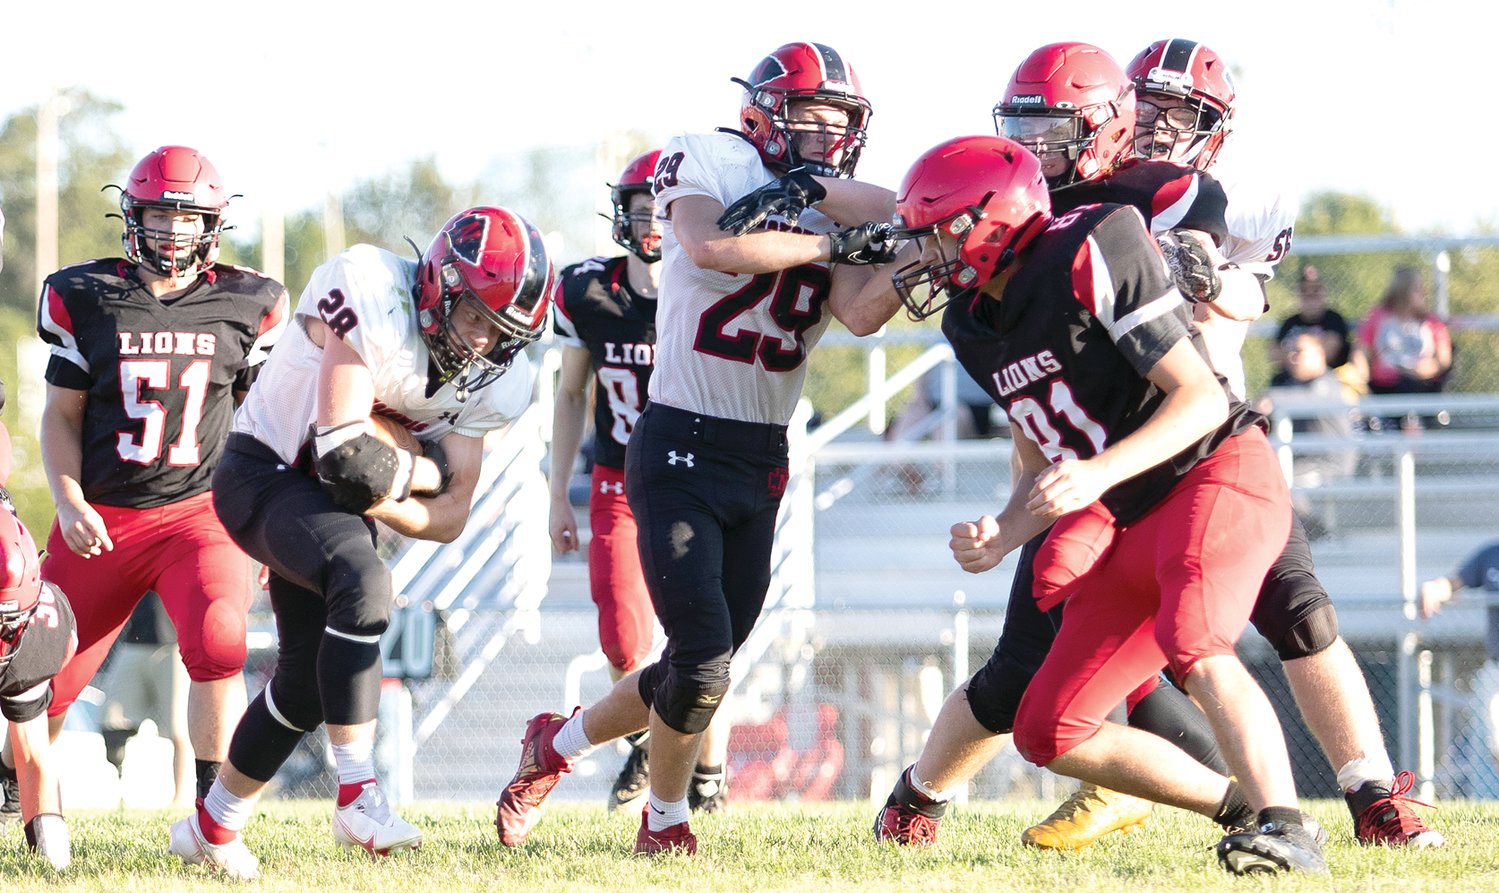 Nokomis' Matthew Hill (#29) and Mason Morris (#56) clear a path for Jake Watson (#28) during the Redskins' game against Edwards County on Saturday, Sept. 25, in Albion. Watson, who ran for 160 yards, and Hill, who ran for 180 yards, helped the Redskins pick up nearly 500 yards on the ground in a 59-3 victory over the Lions.